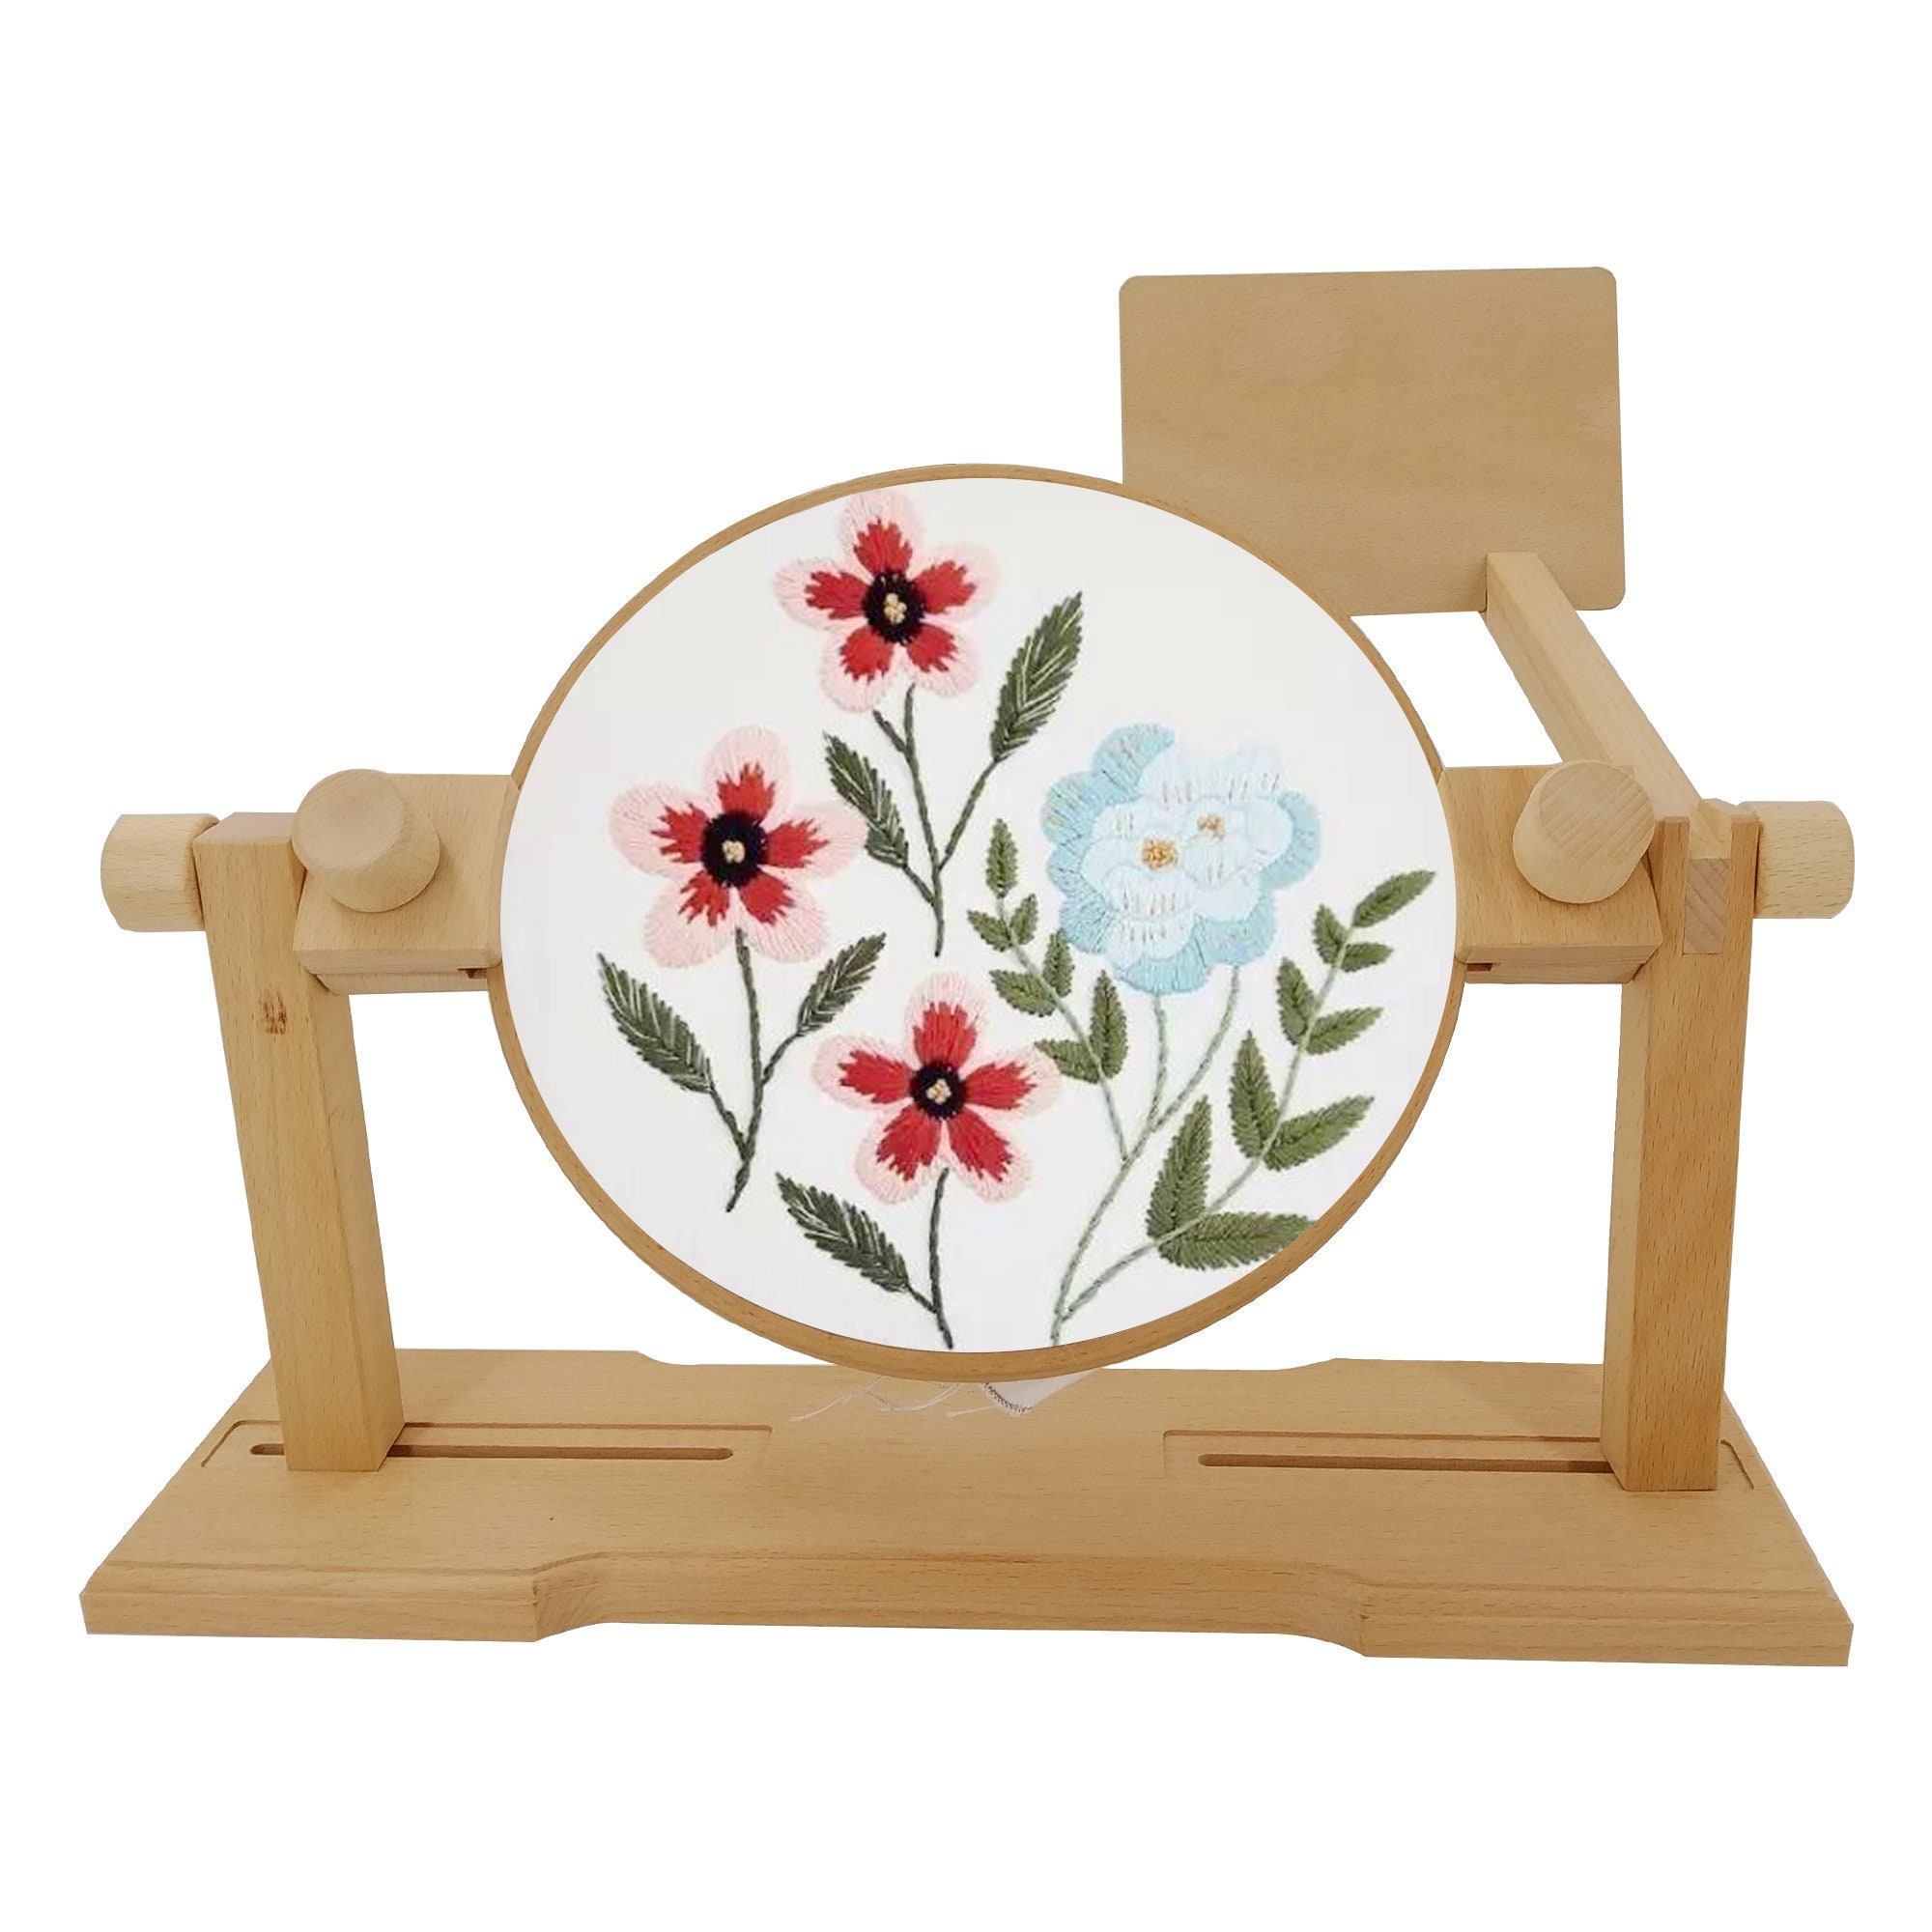 Nurge Adjustable Embroidery Hoop Stand, Adjustable Wooden Embroidery Table  Stand, Cross Stitch Pattern Stand, Embroidery Seat Frame 